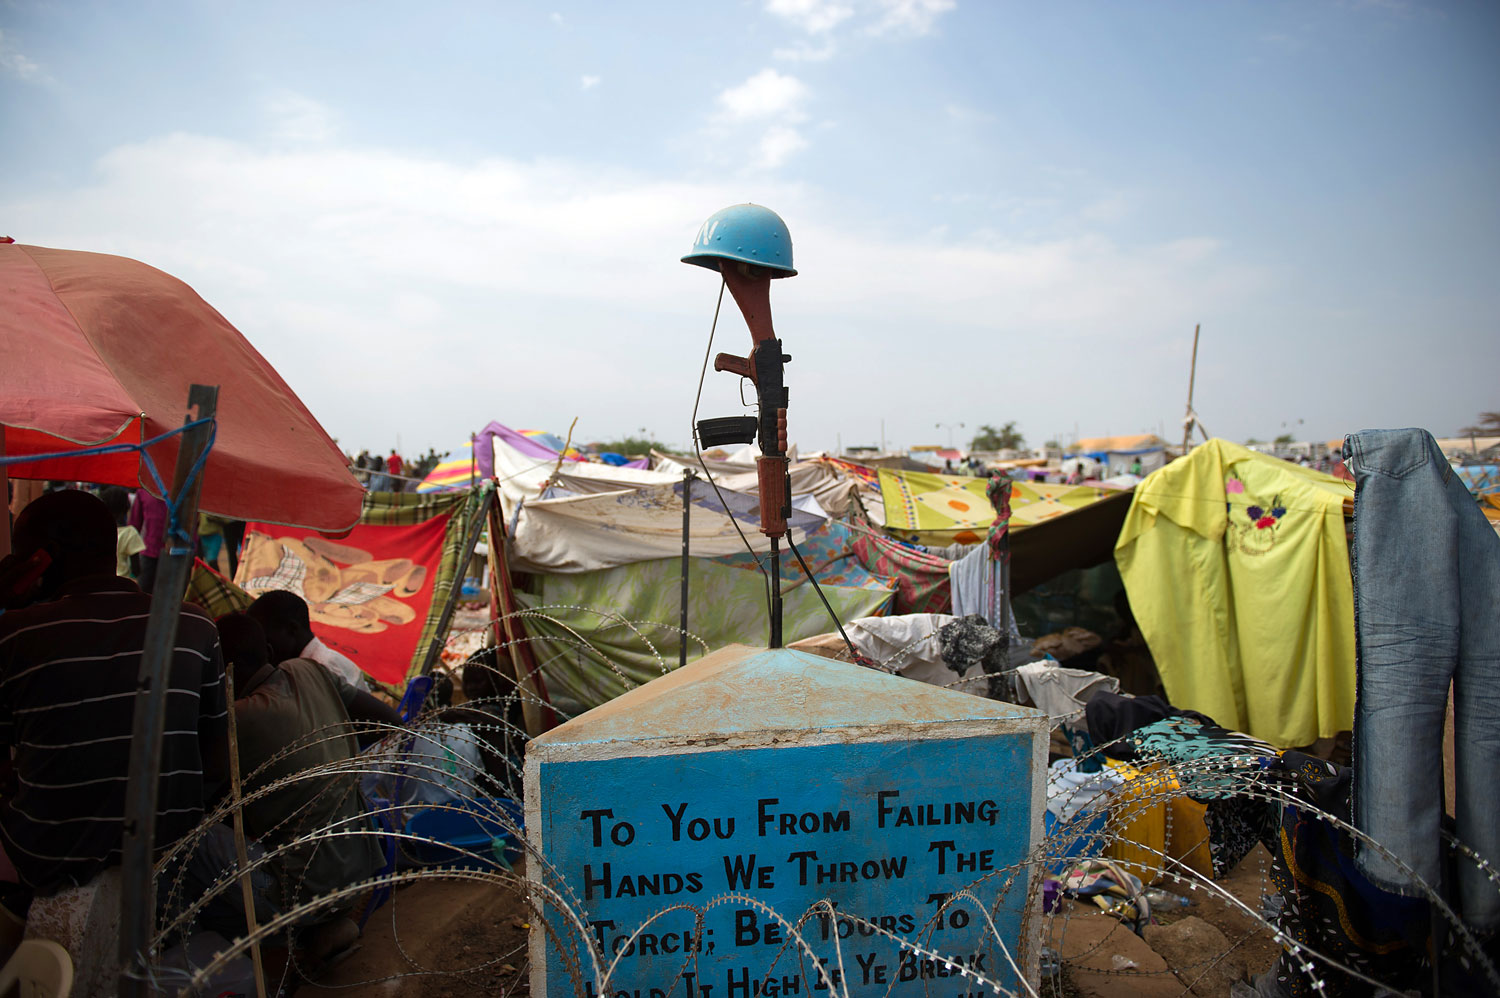 A monument for fallen peacekeepers stands amidst makeshift tents in a spontaneous camp for internally displaced persons at the United Nations Mission to South Sudan base in Juba, on Jan. 9, 2014.